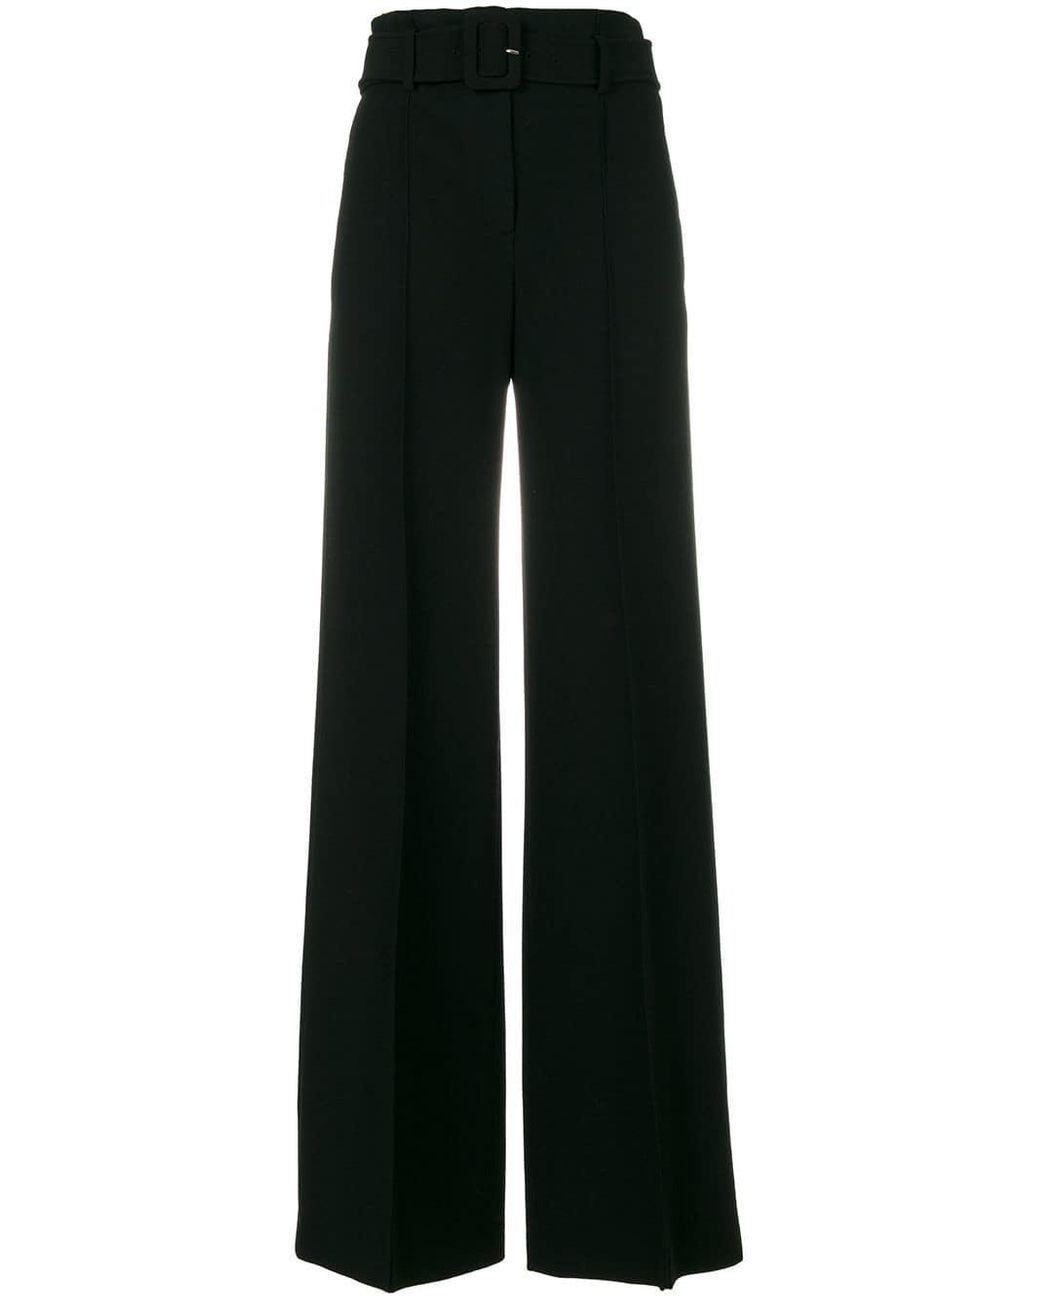 Theory Belted Stretch High Waist Trousers in Black | Lyst